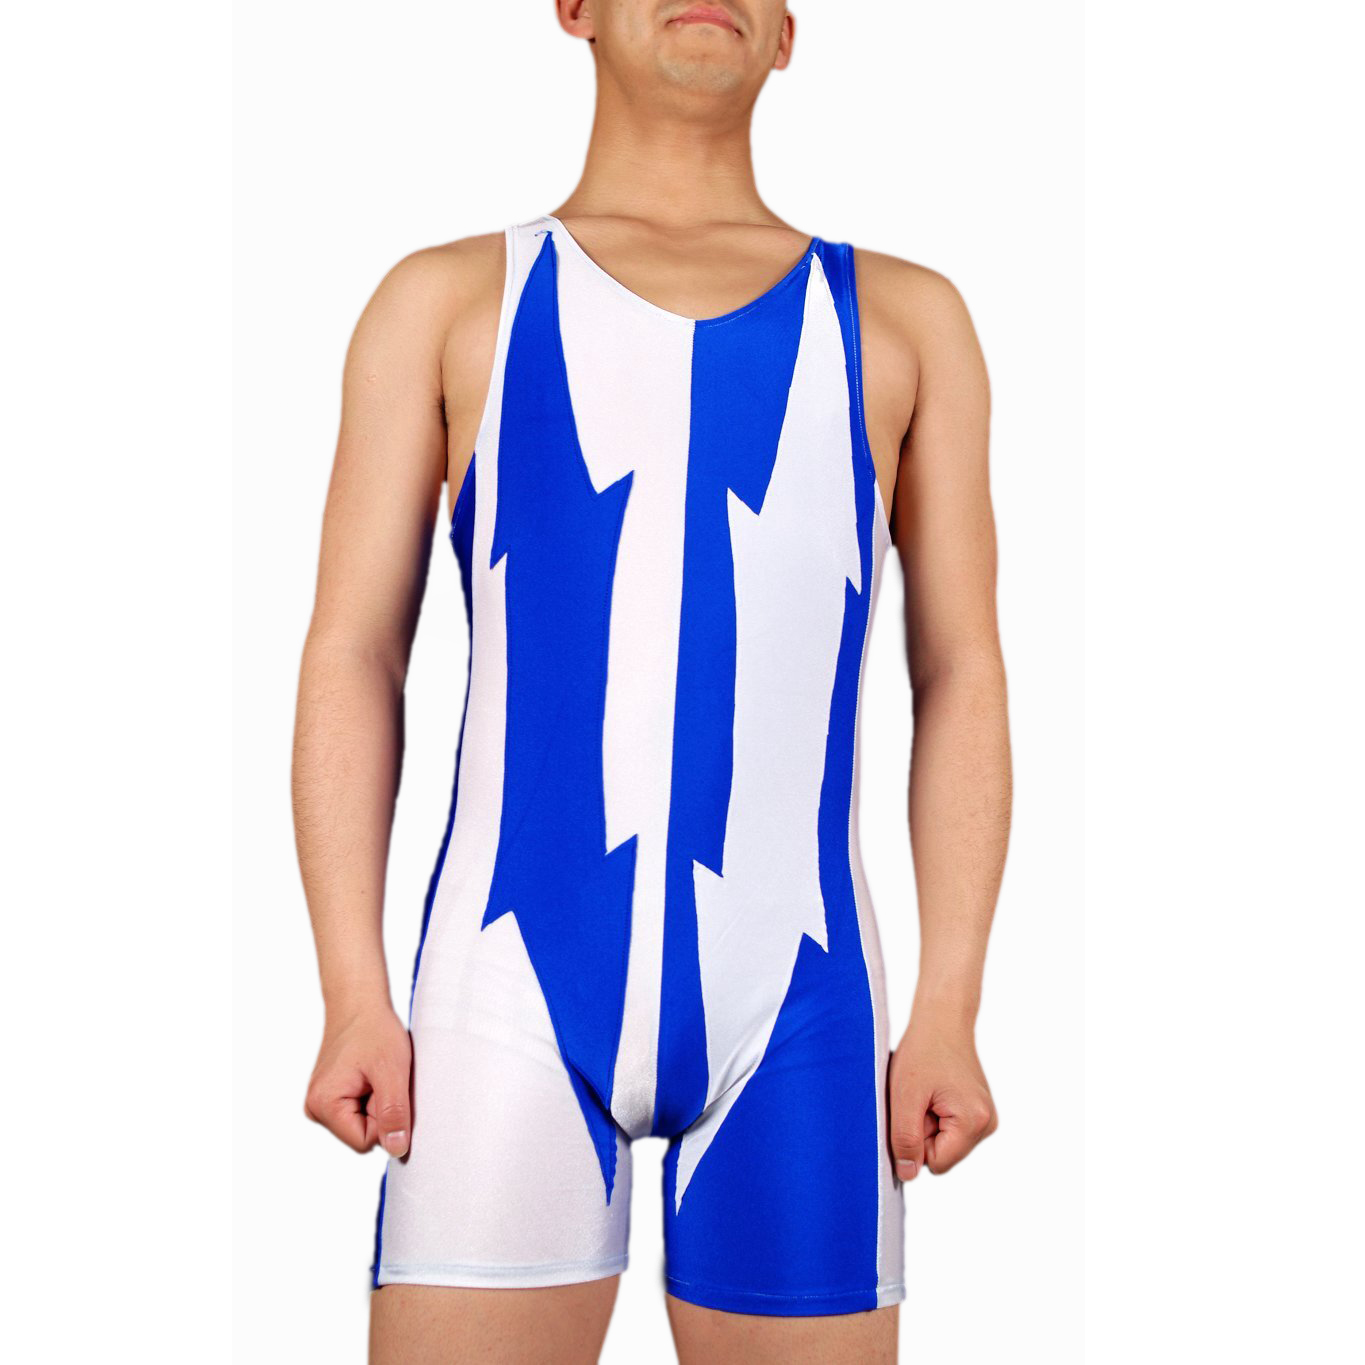 Men's Jumpsuit-styled White and Blue Lycra Spandex Sleeveless Ca - Click Image to Close